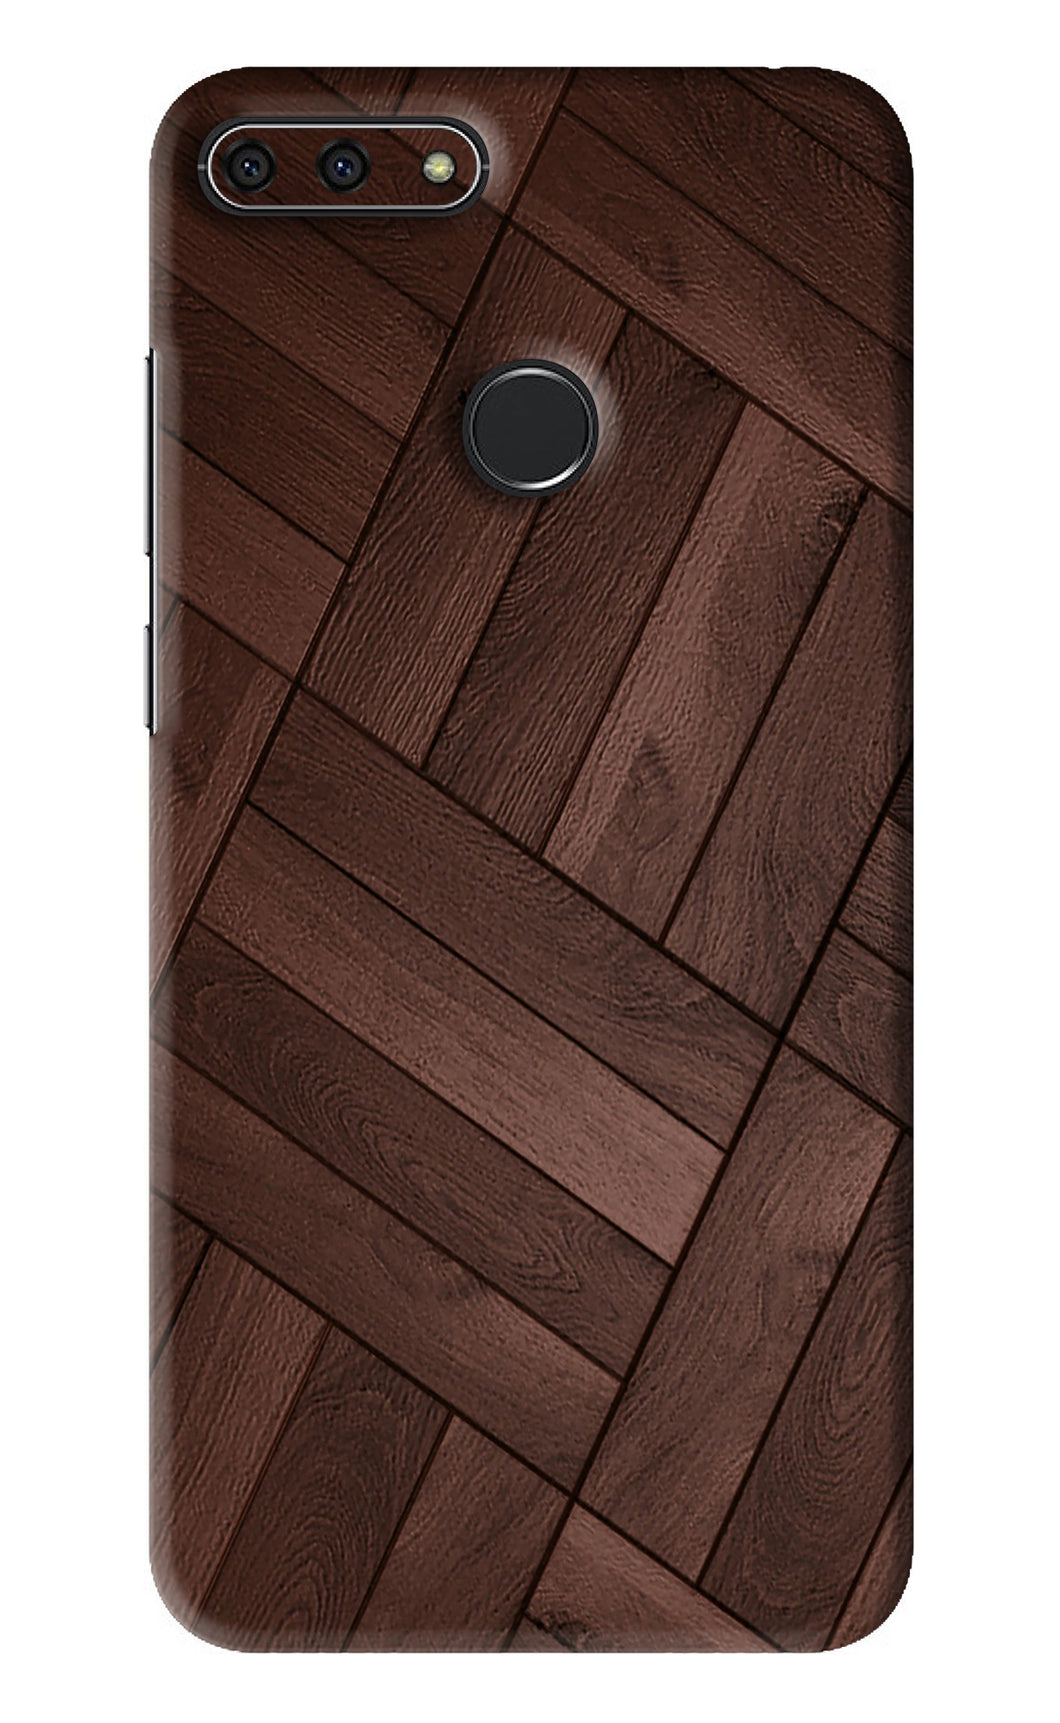 Wooden Texture Design Huawei Honor 7A Back Skin Wrap